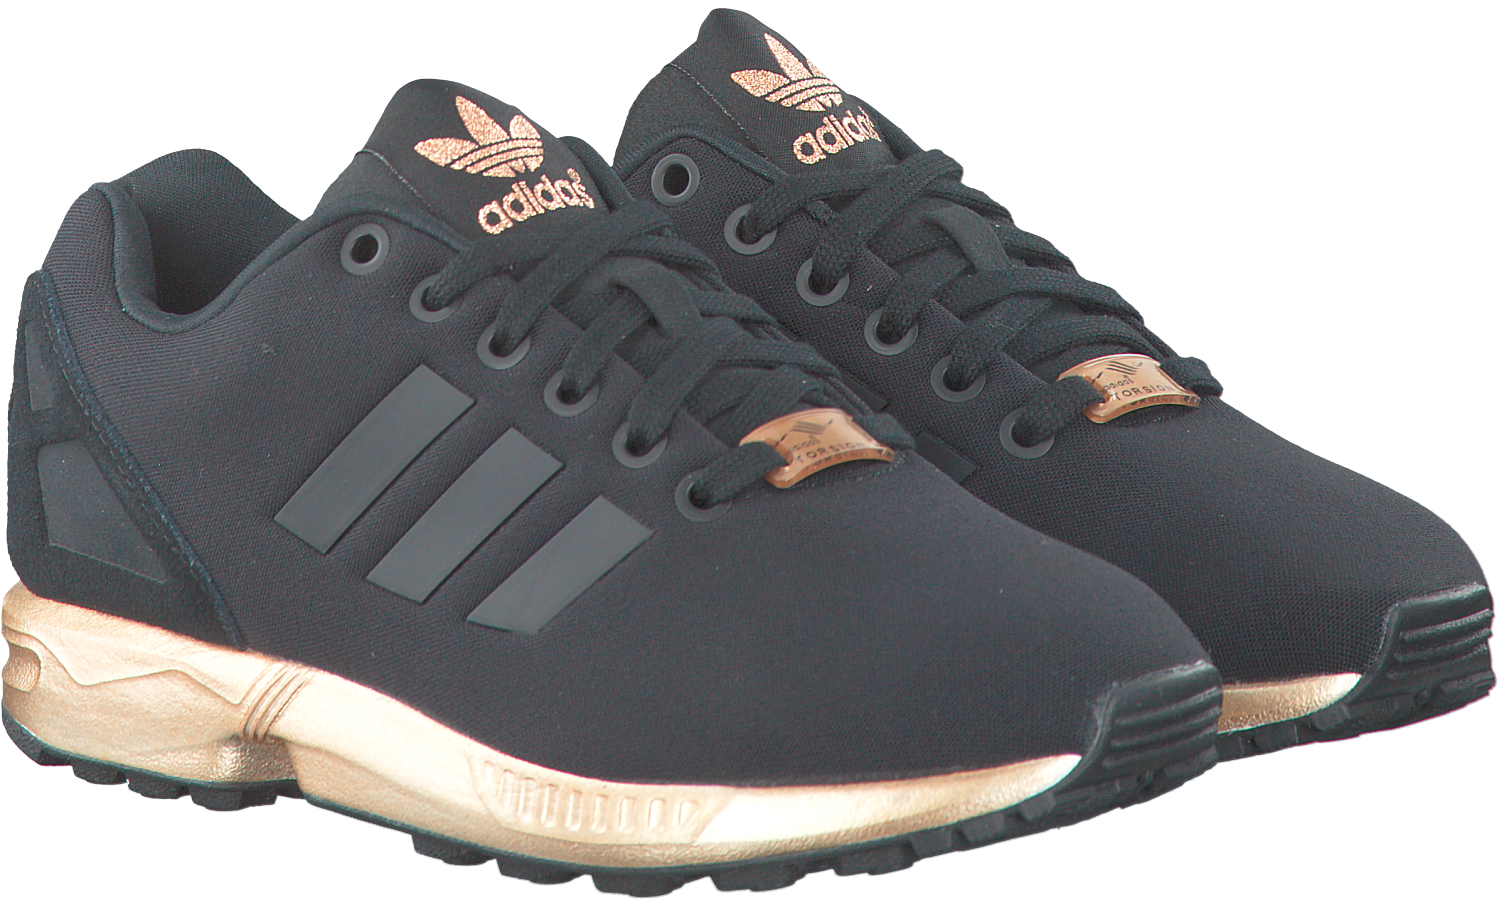 adidas sneakers zx flux - wexartecology 